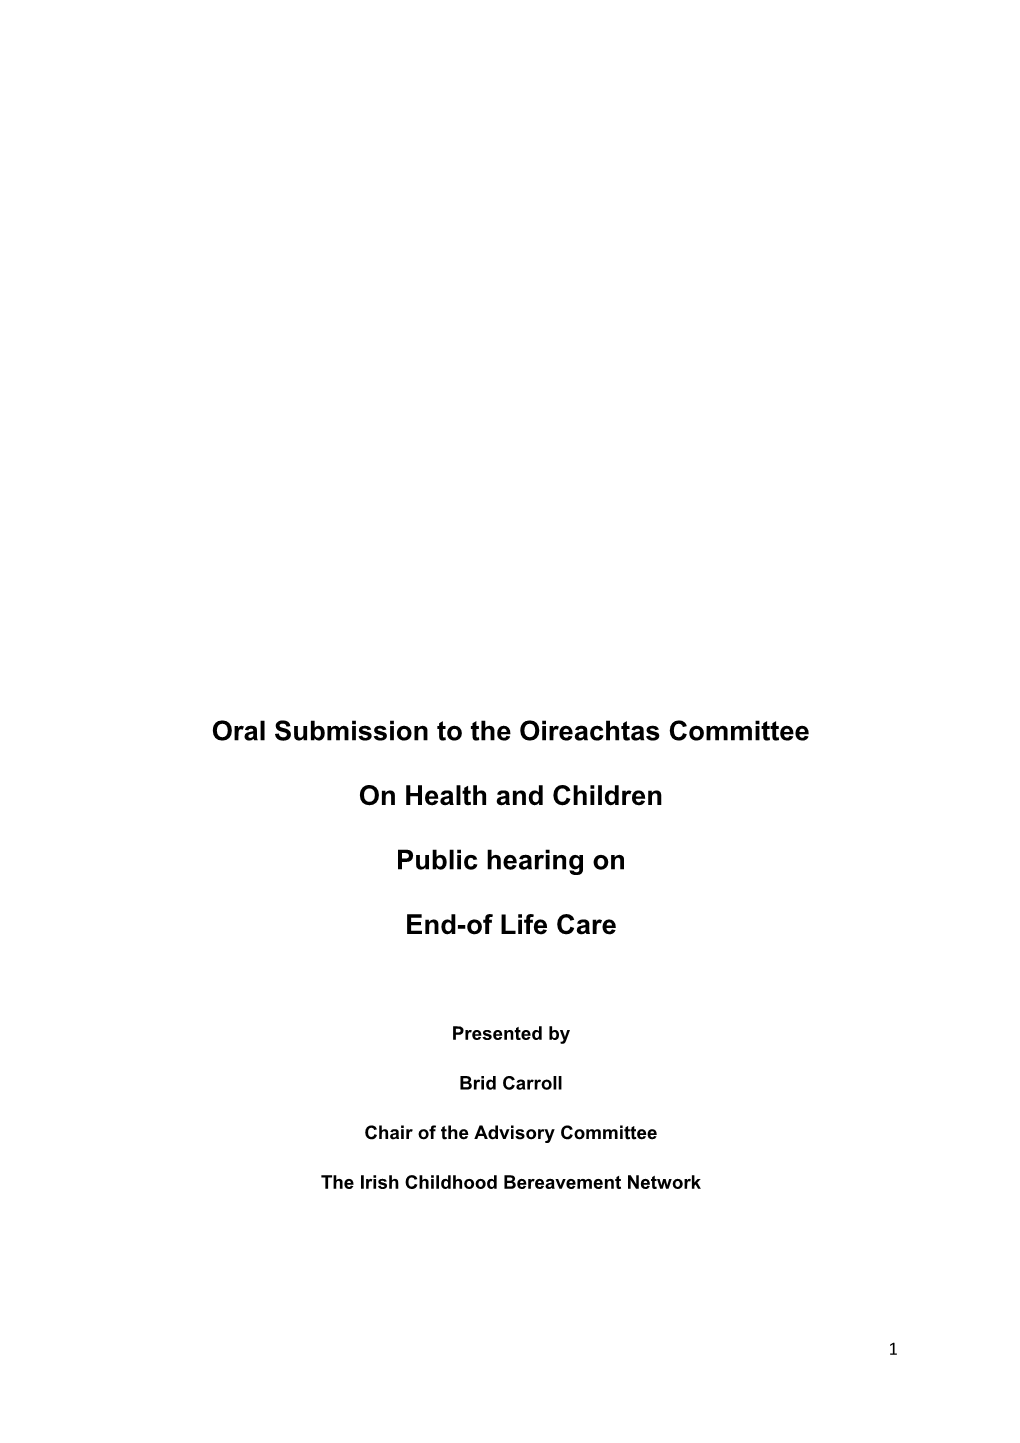 Oral Submission to the Oireachtas Committee